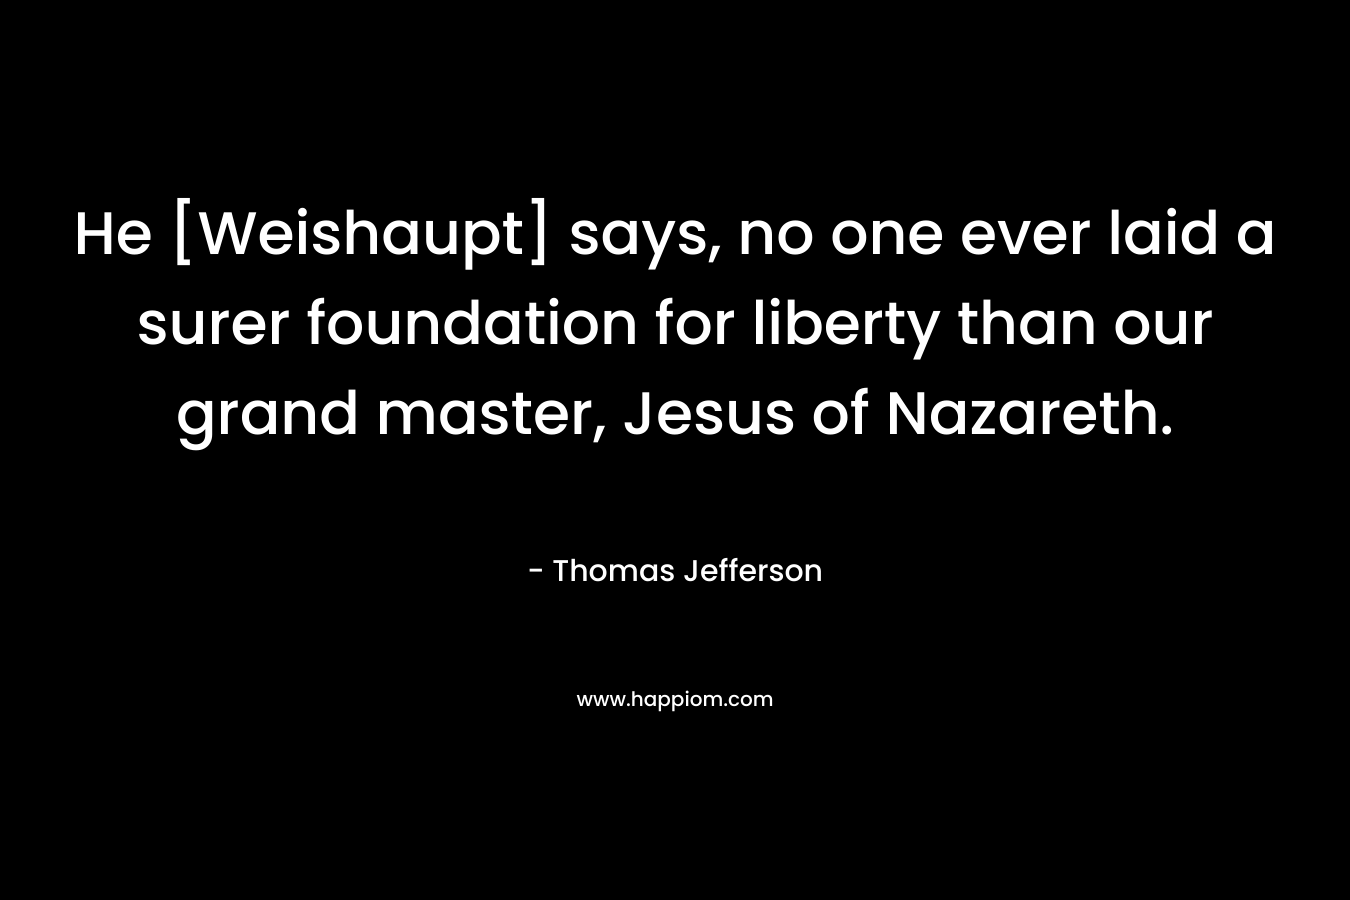 He [Weishaupt] says, no one ever laid a surer foundation for liberty than our grand master, Jesus of Nazareth. – Thomas Jefferson